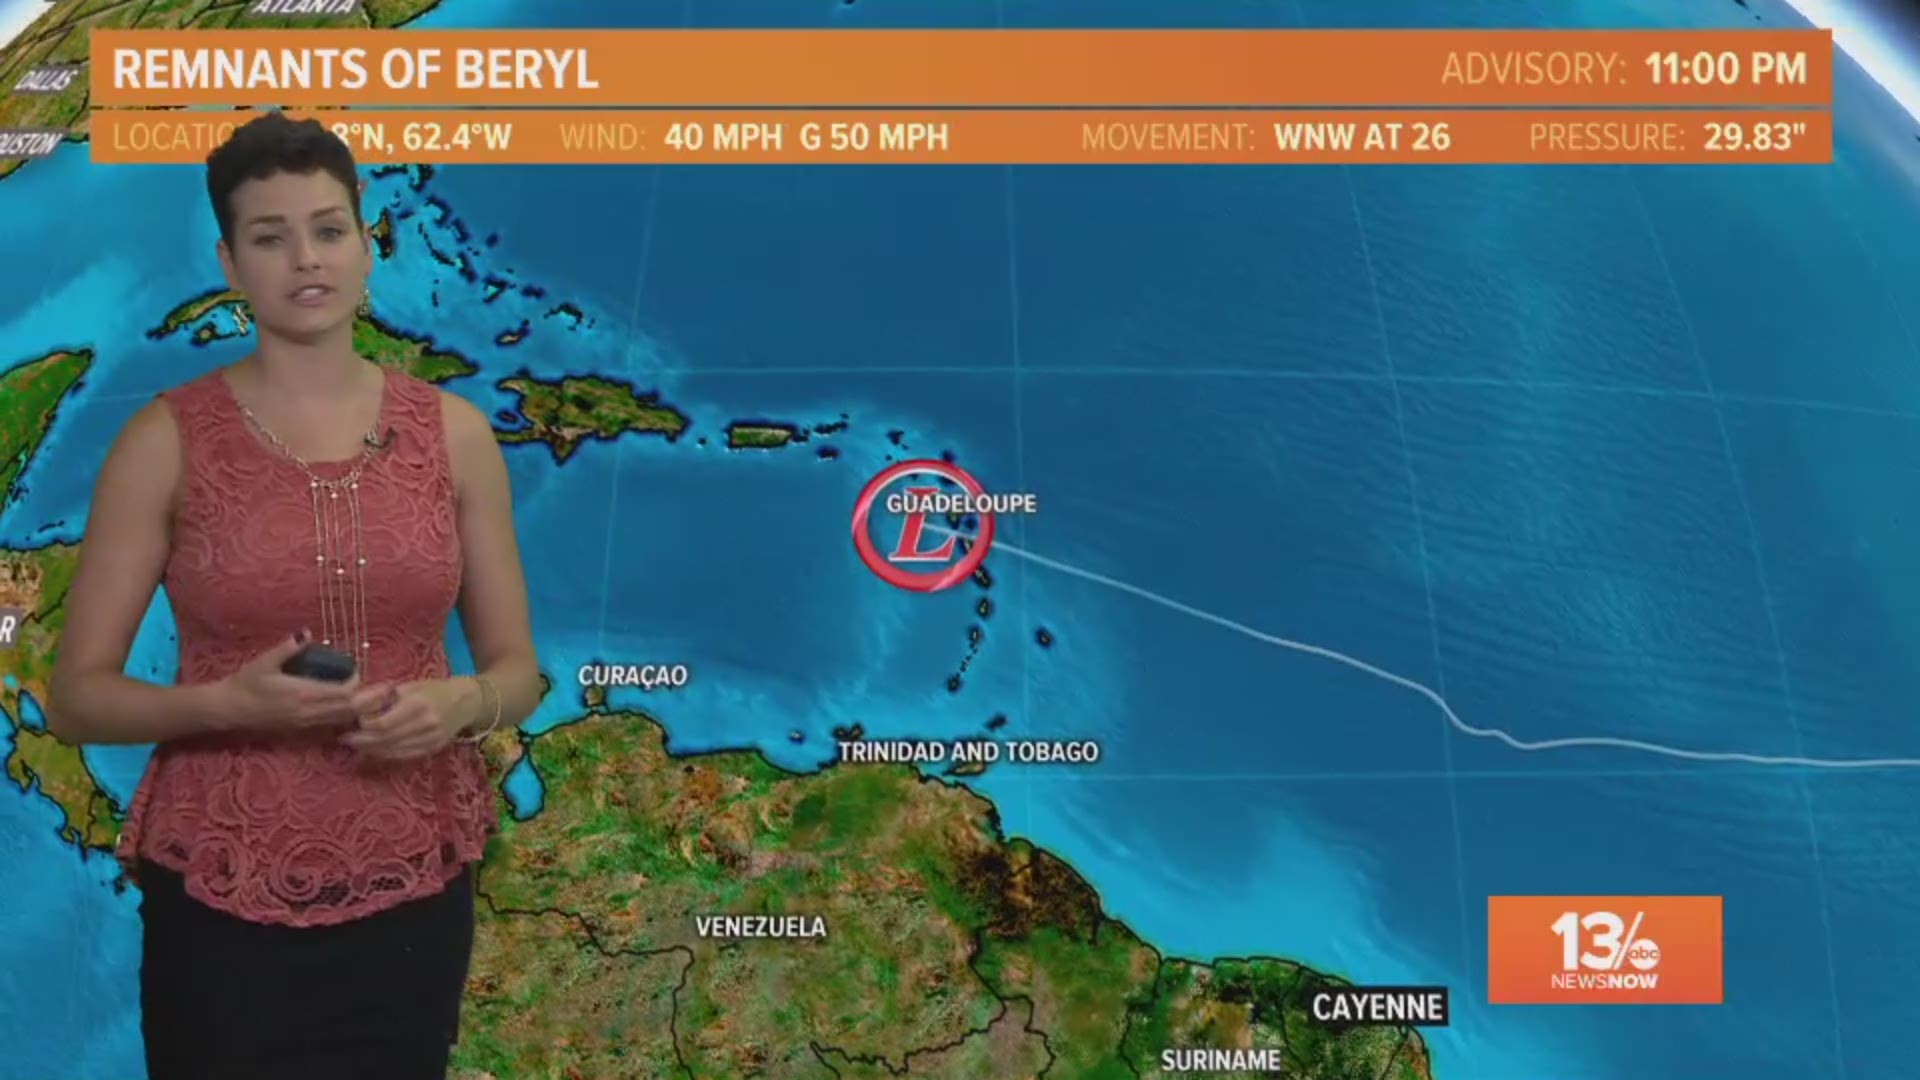 13News Now Meteorologist Crystal Harper has an update on 7/9/18 on the latest forecast and track of Tropical Storm Chris off the East Coast, as well as the remnants of what was once Hurricane Beryl in the Caribbean.